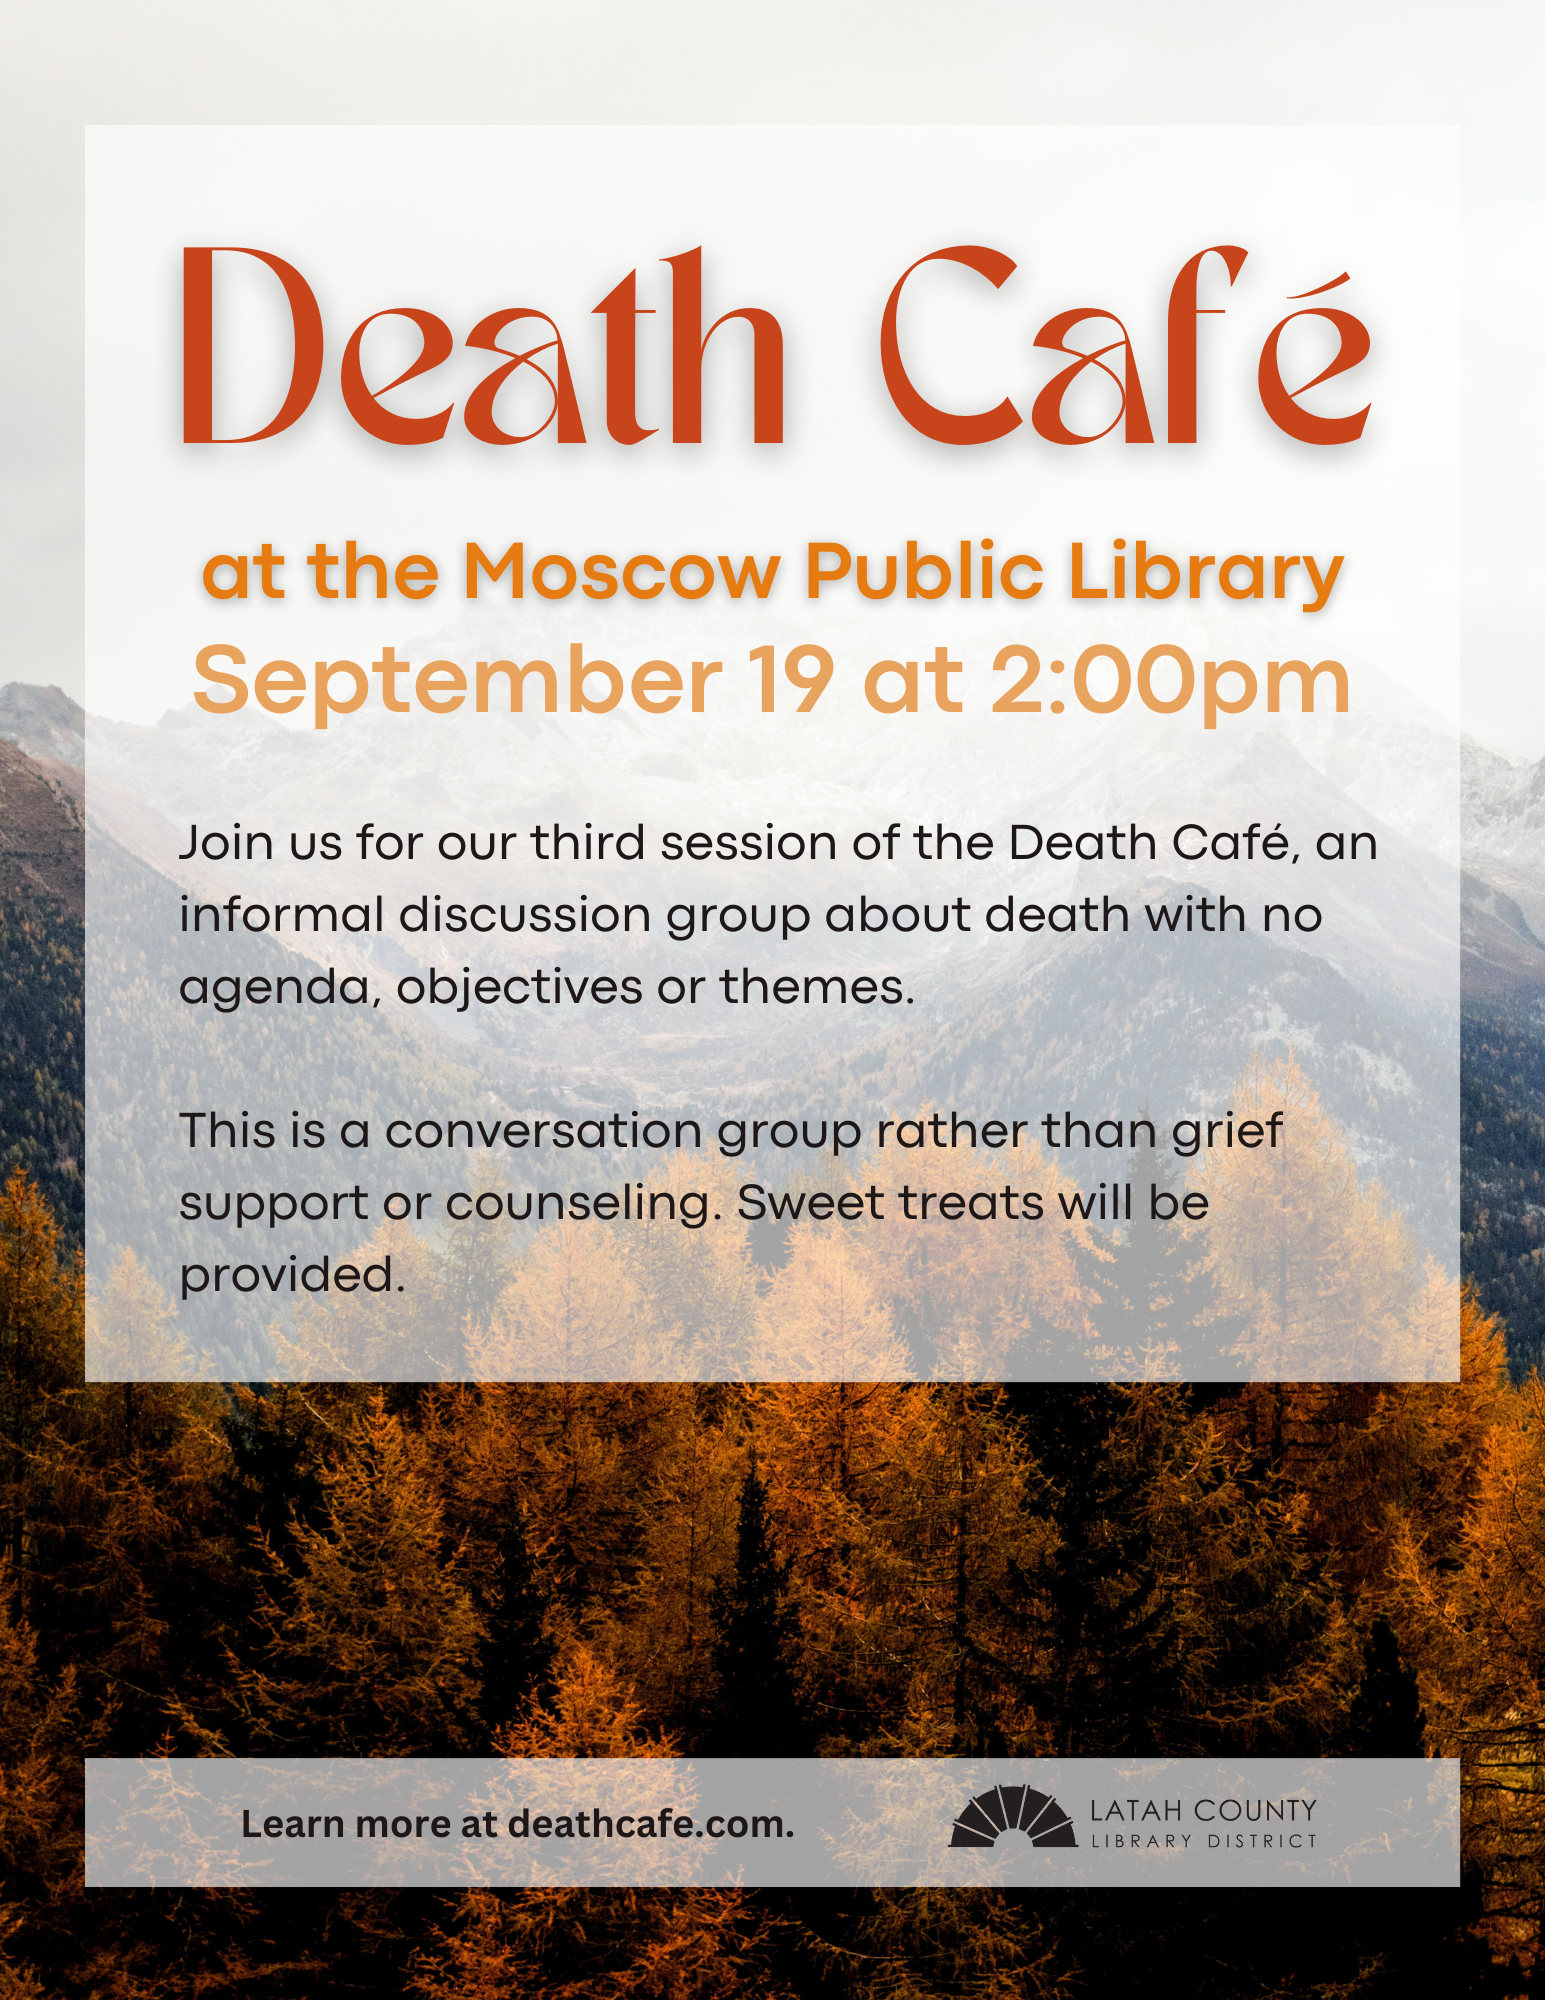 Death Café at the Moscow Public Library